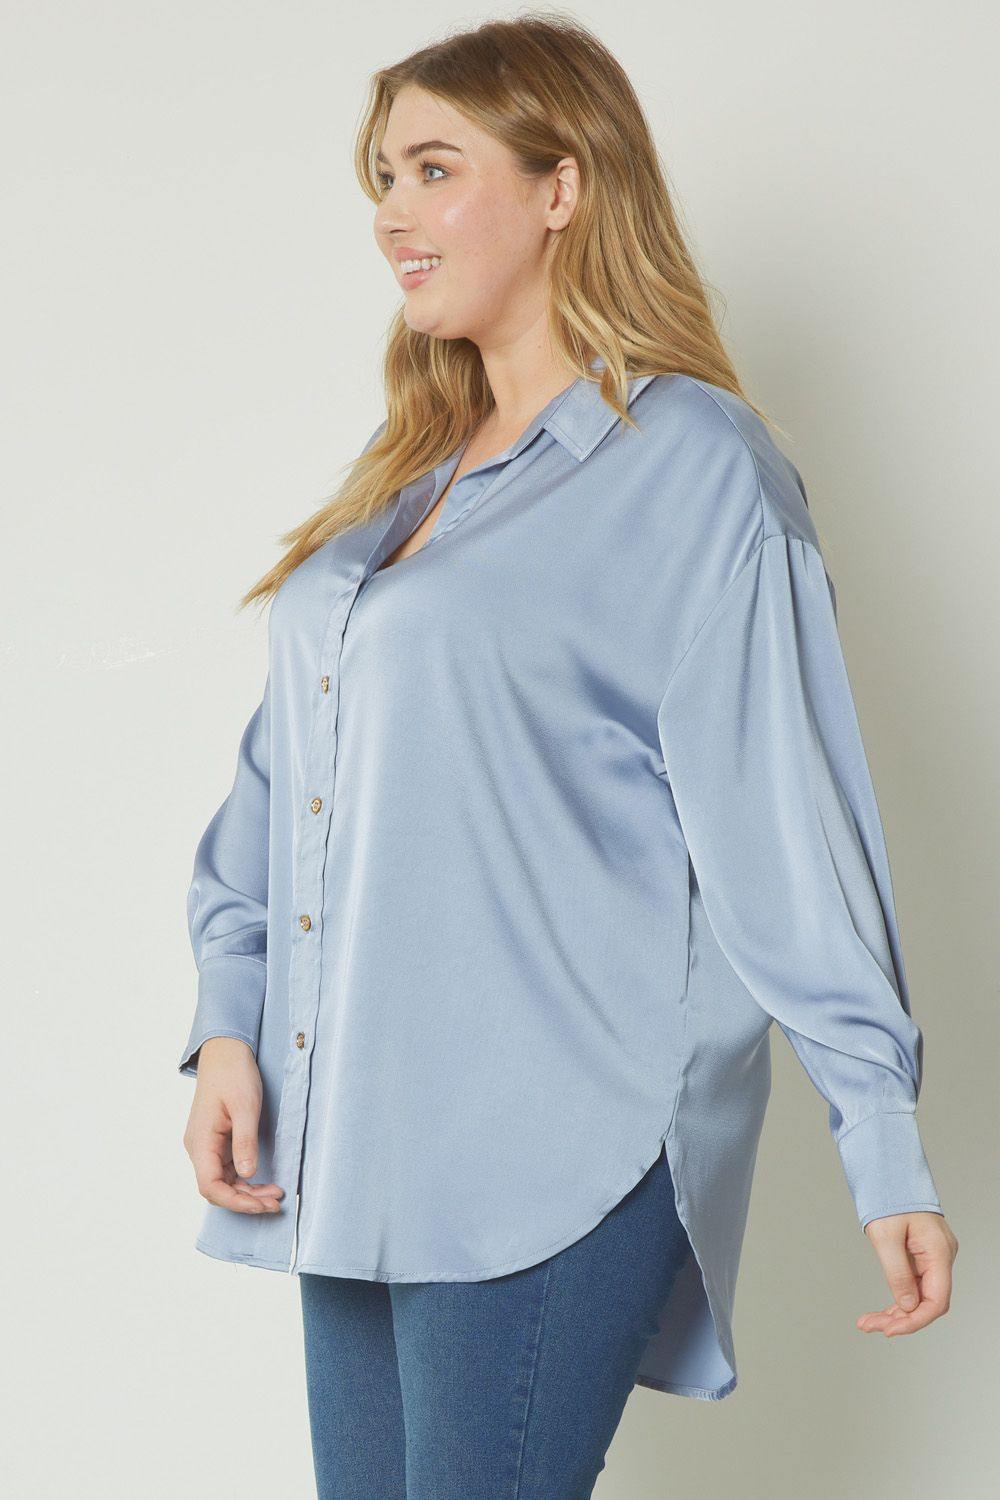 Long-sleeved collared button down satin  blouse Plus boutique blue